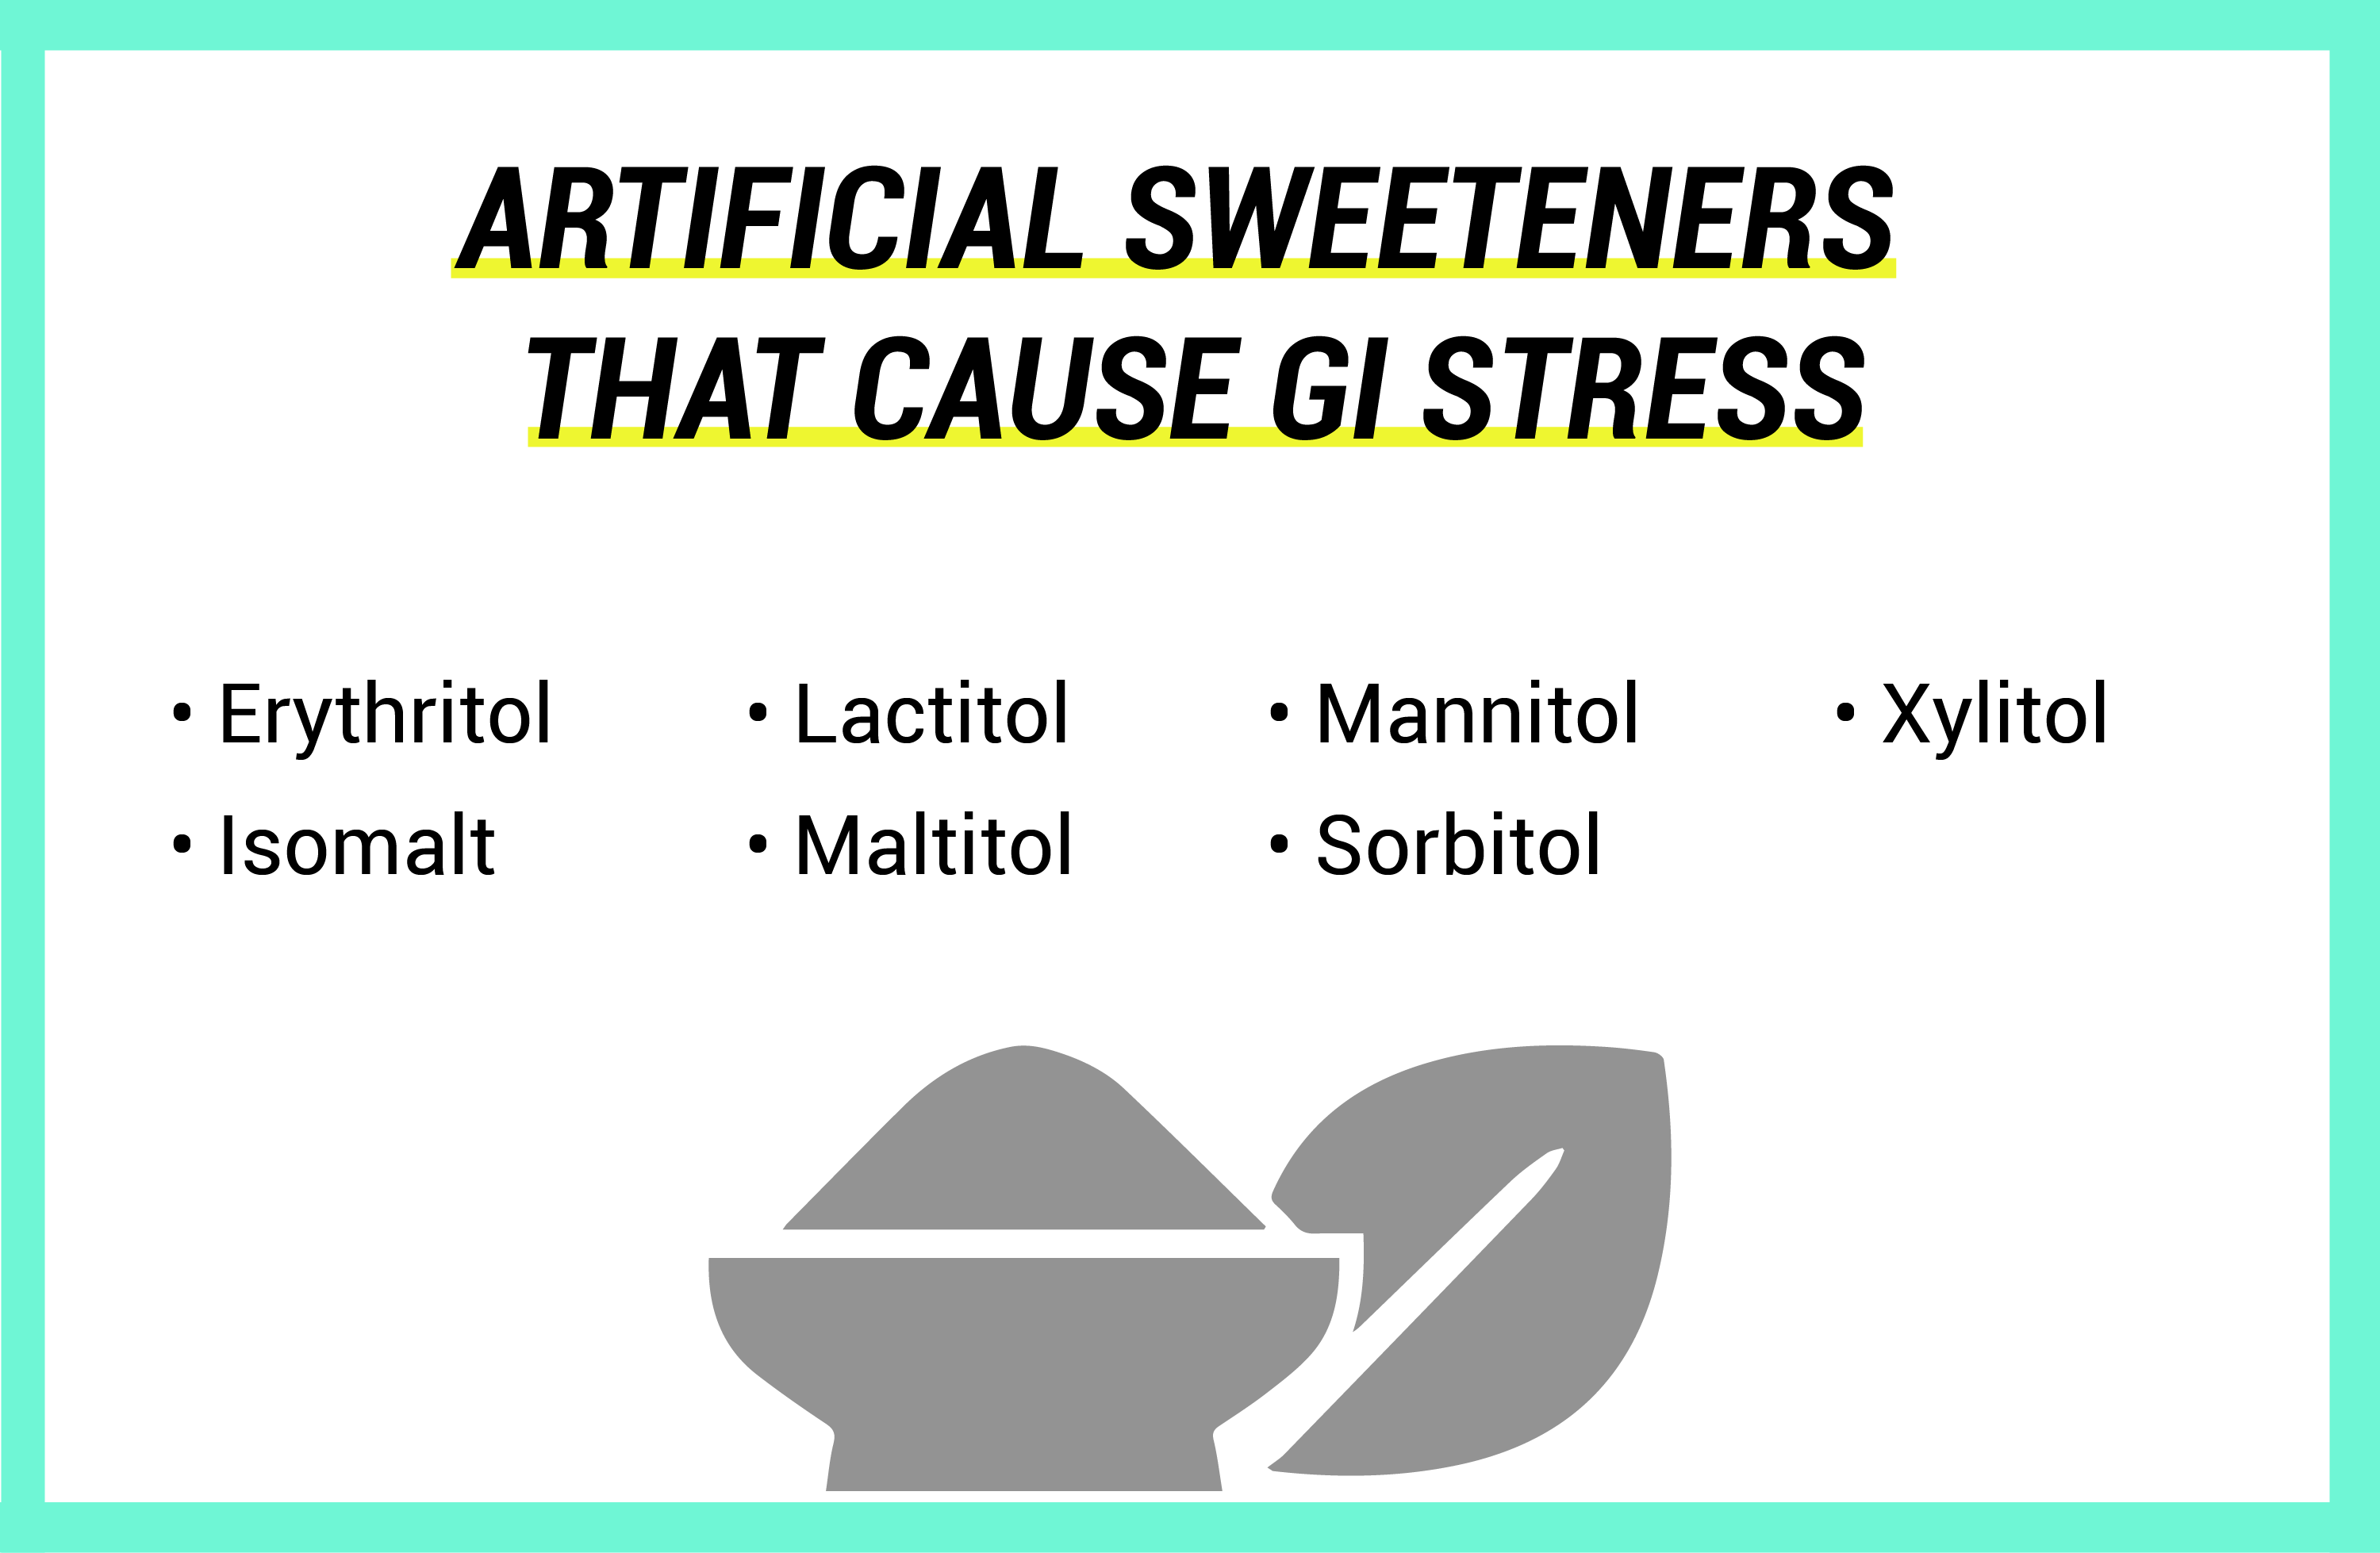 list of artificial sweeteners that cause GI stress